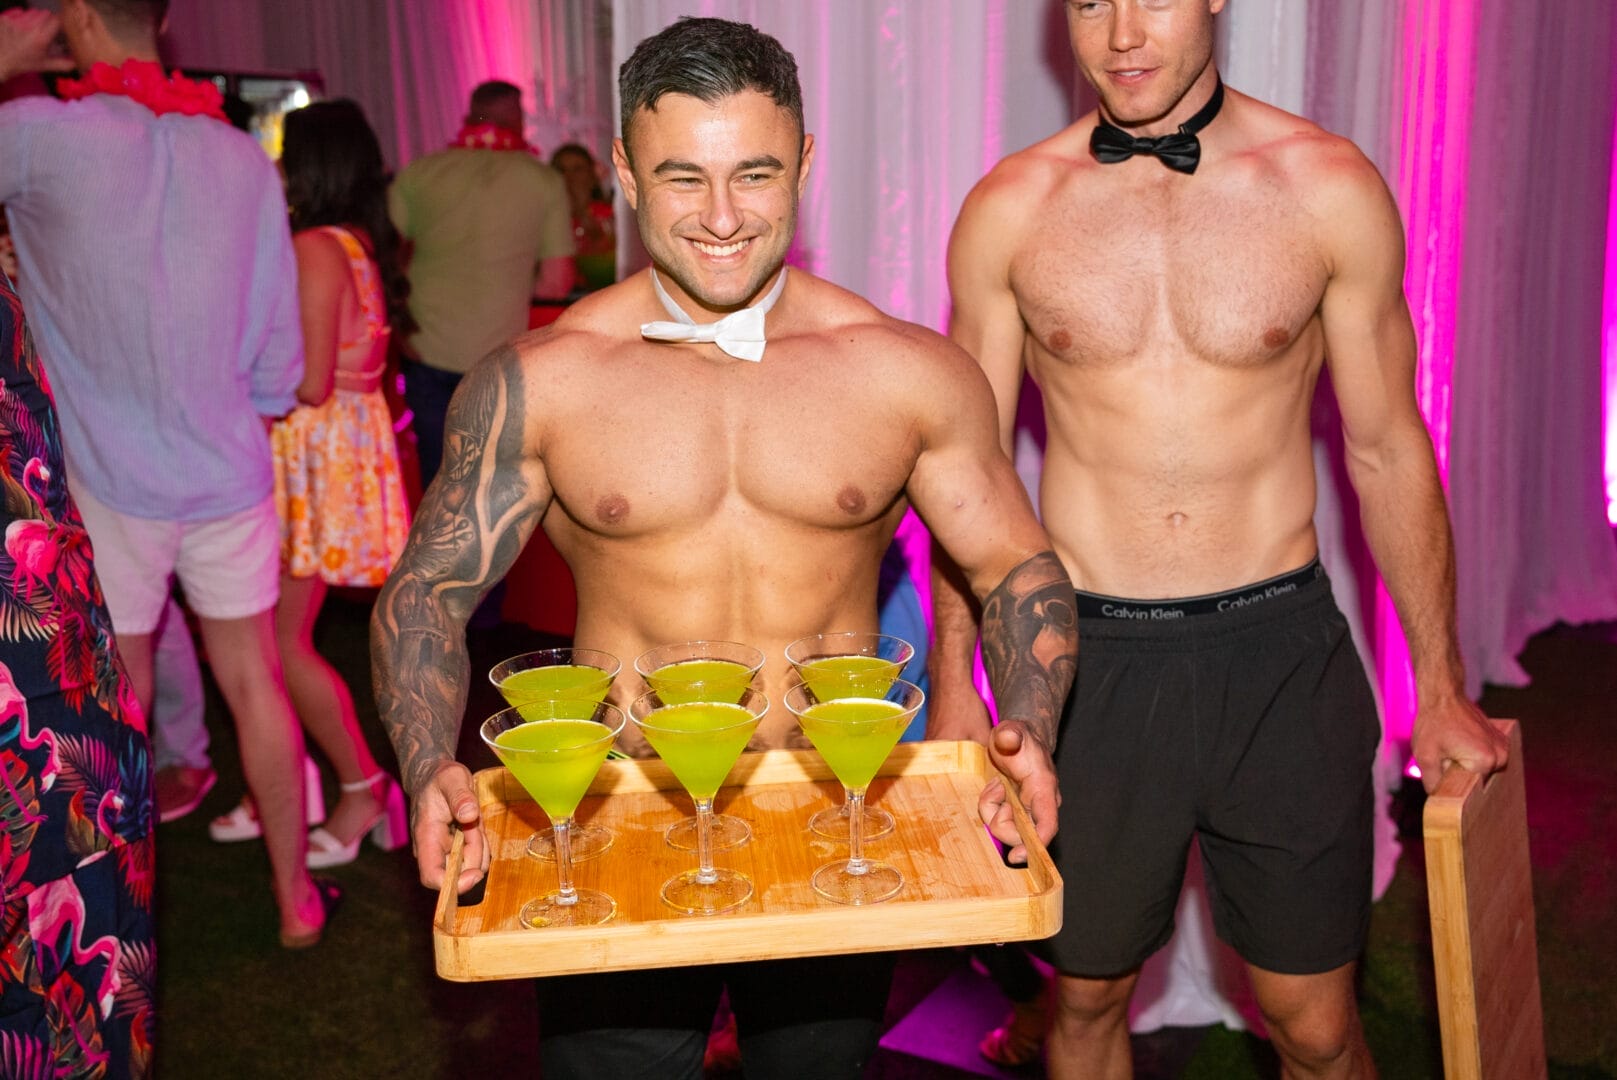 Taylor's Beach Club Themed 21st Birthday Party - Magic Men serving cocktails to guests